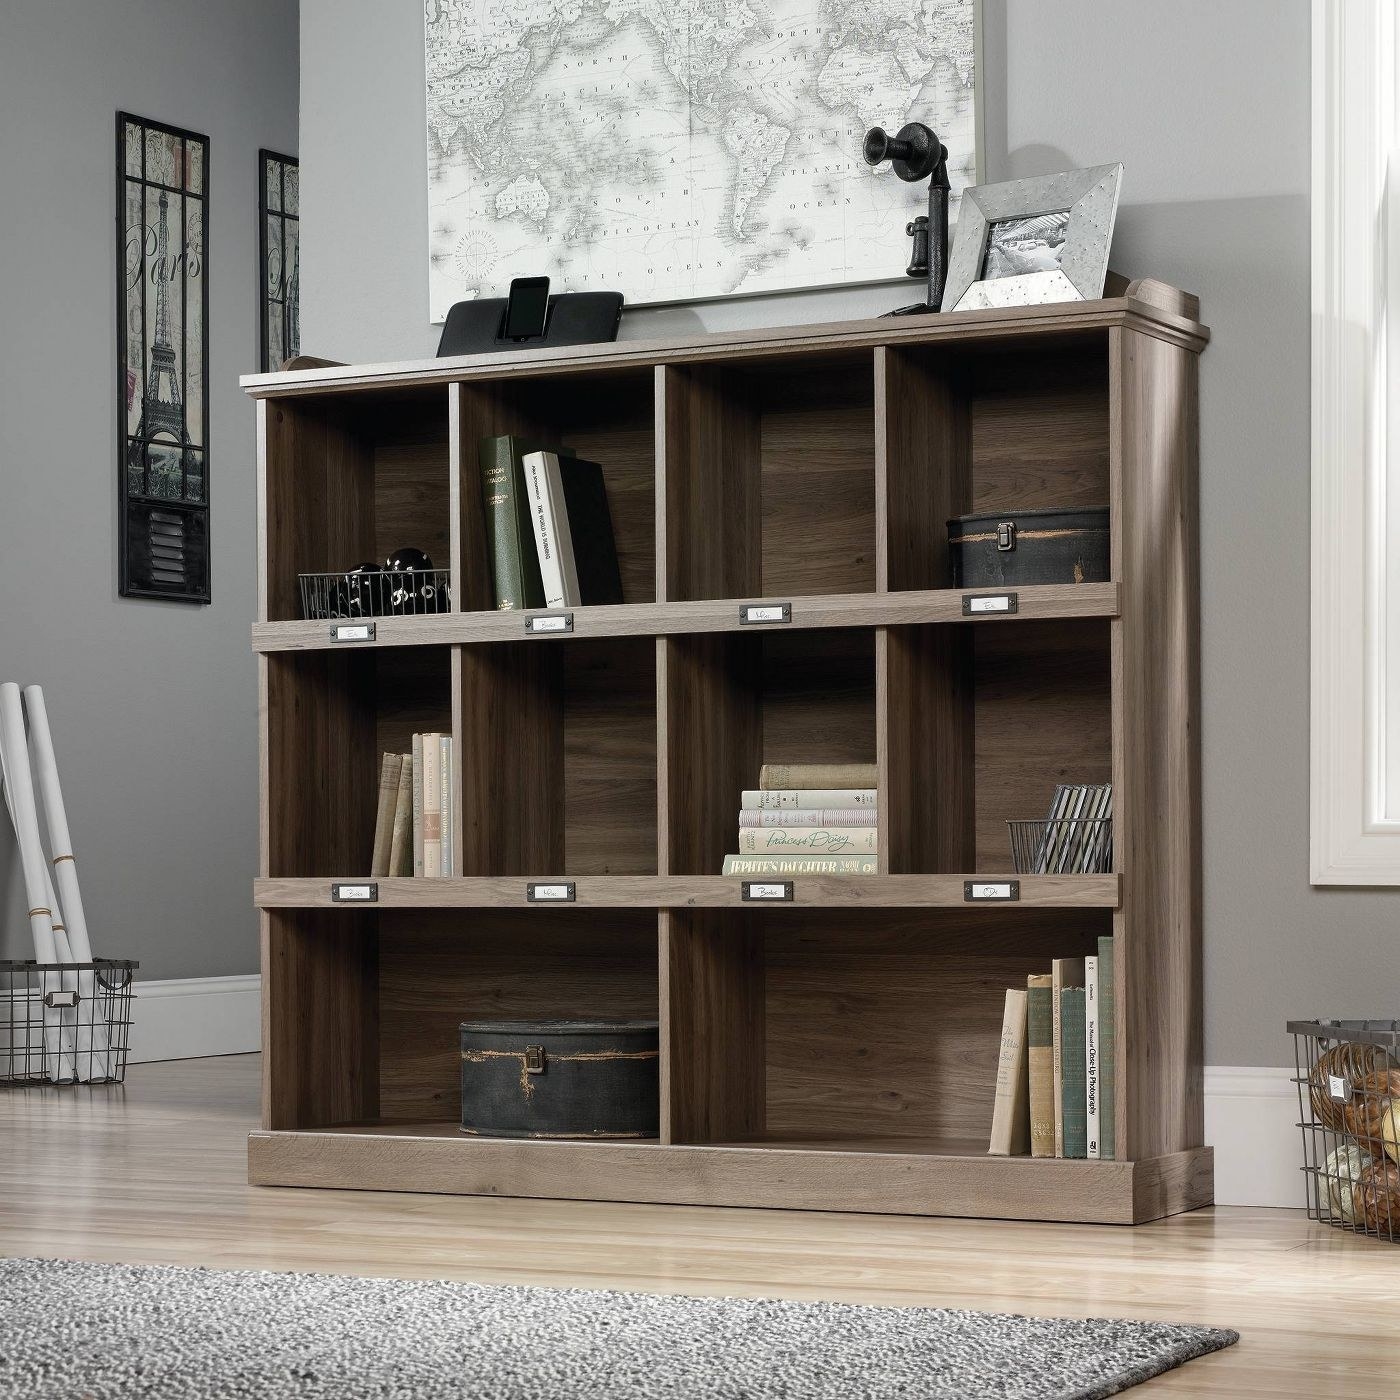 The bookshelf in a living room with multiple items inside it.